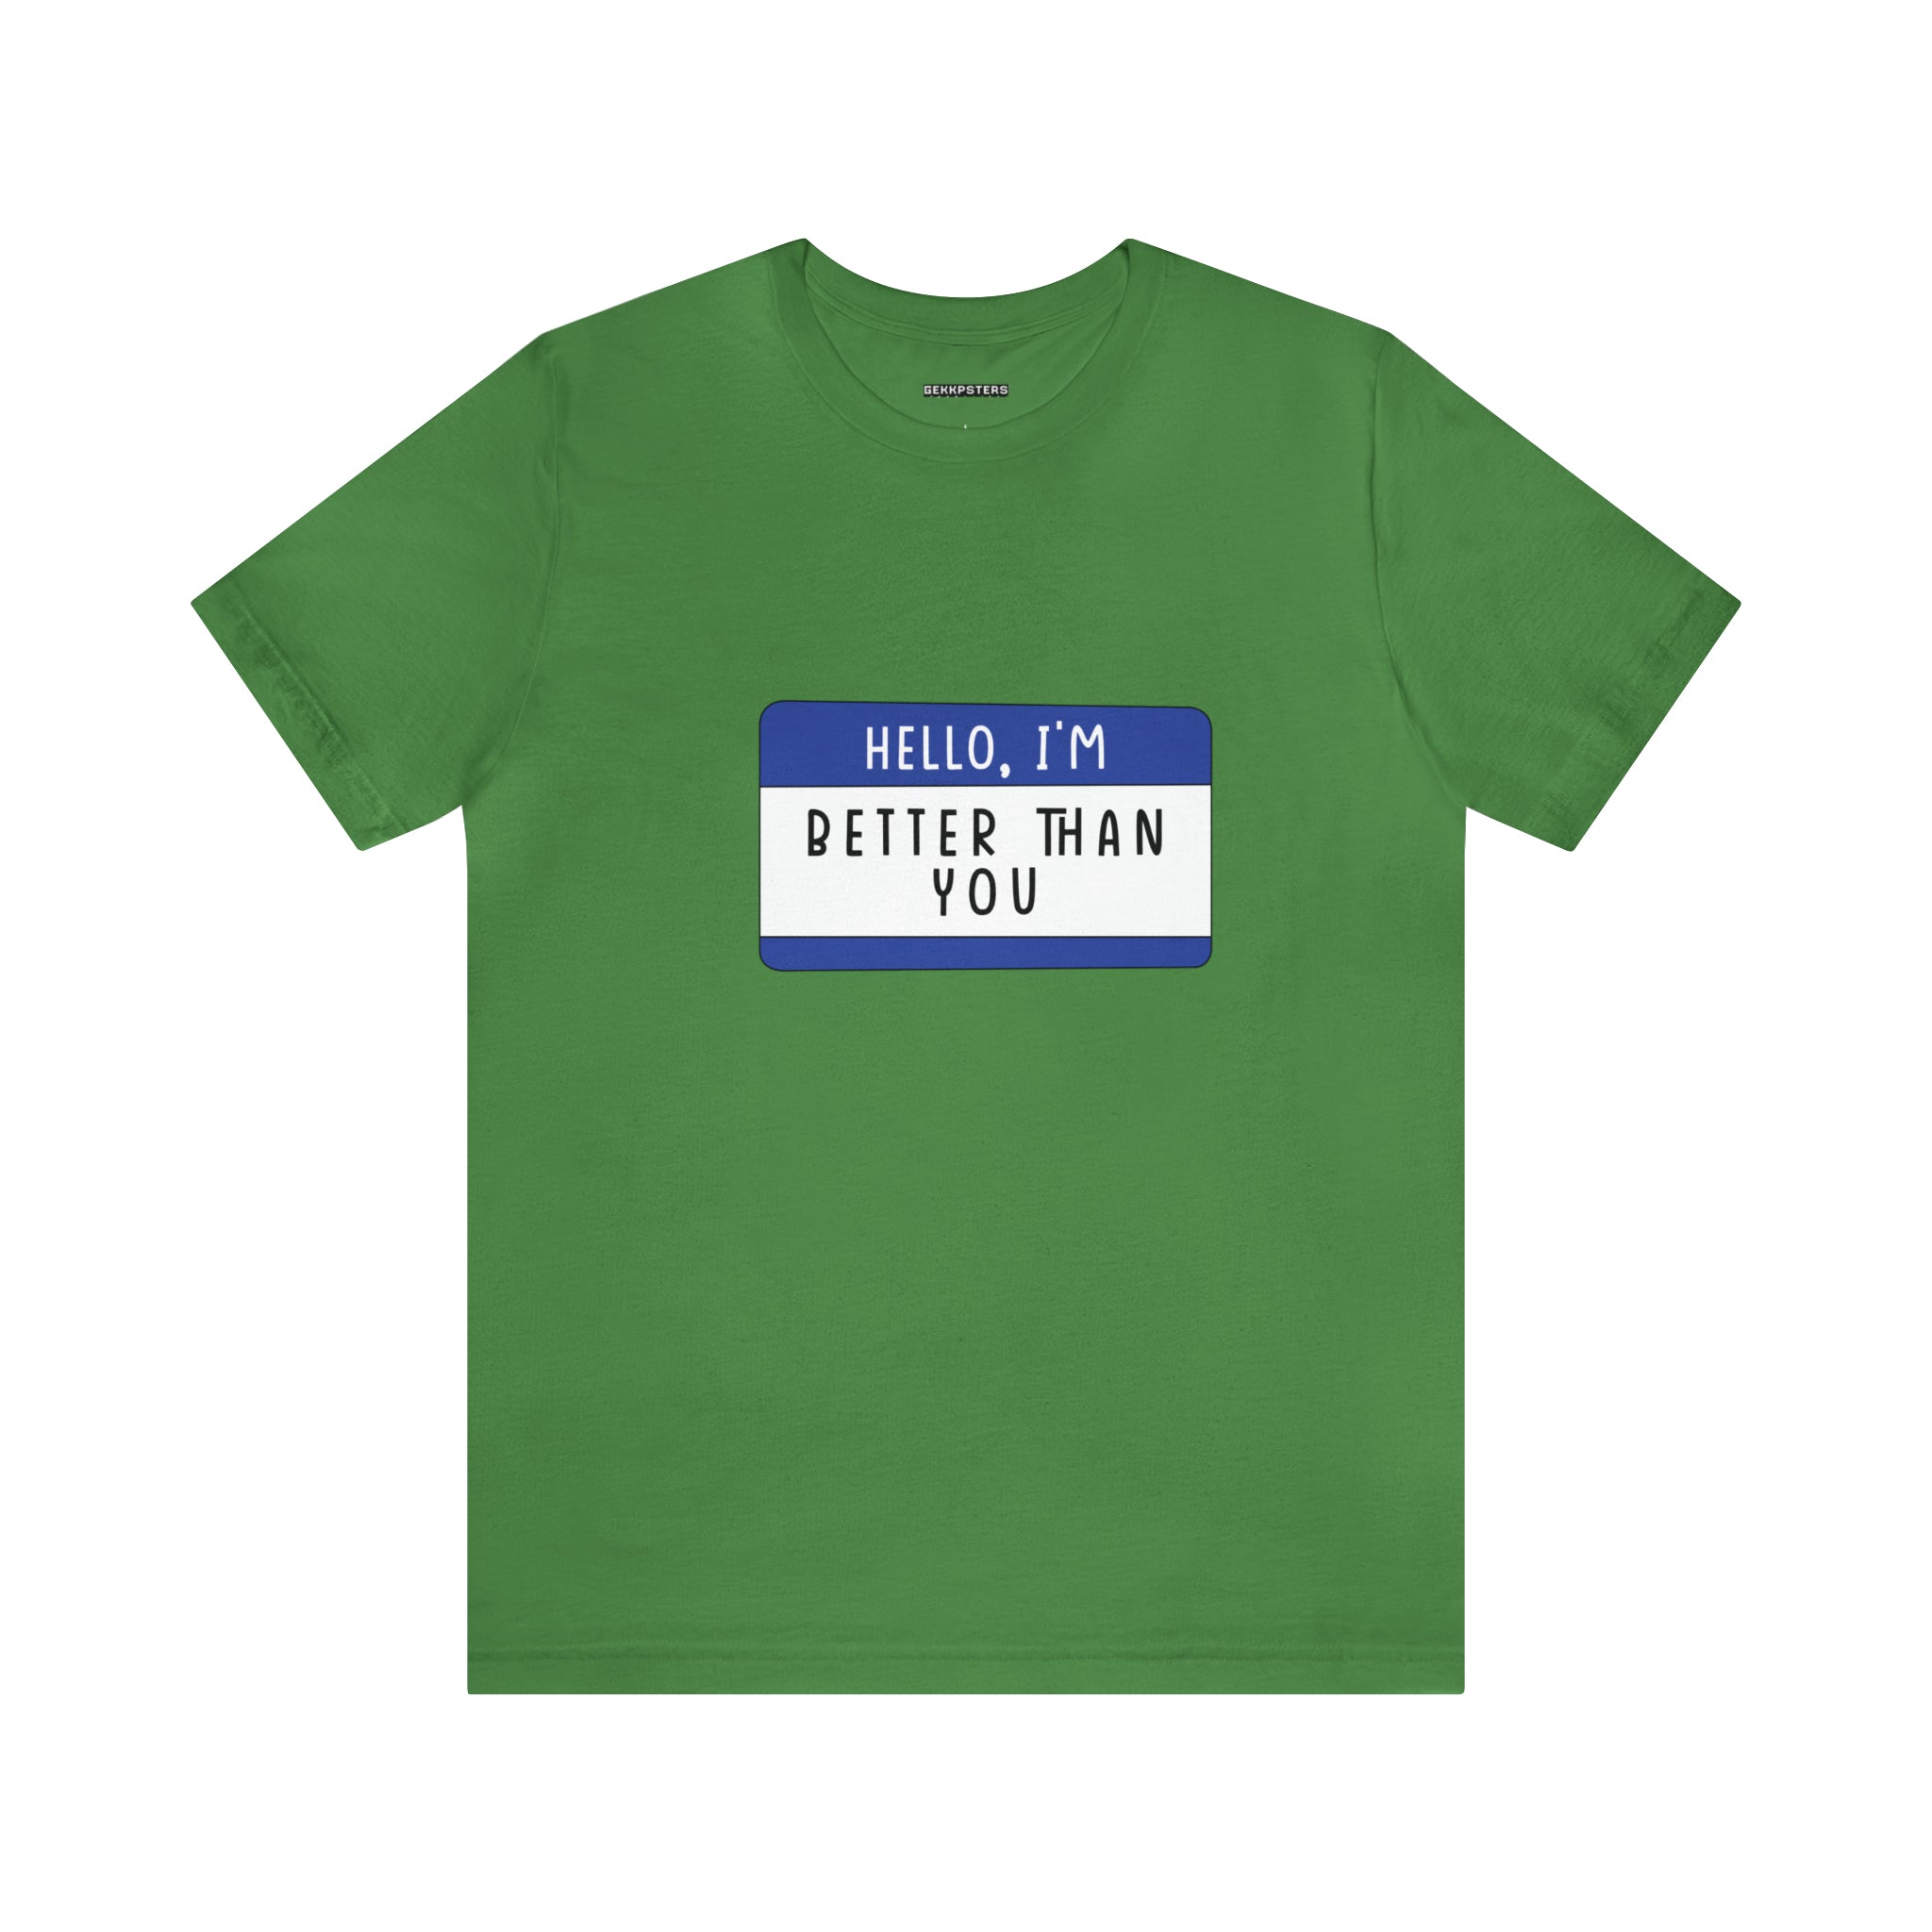 Green "Hello, I'm Better Than You" t-shirt with a blue name tag graphic in white and black text, adding a touch of geeky charm.